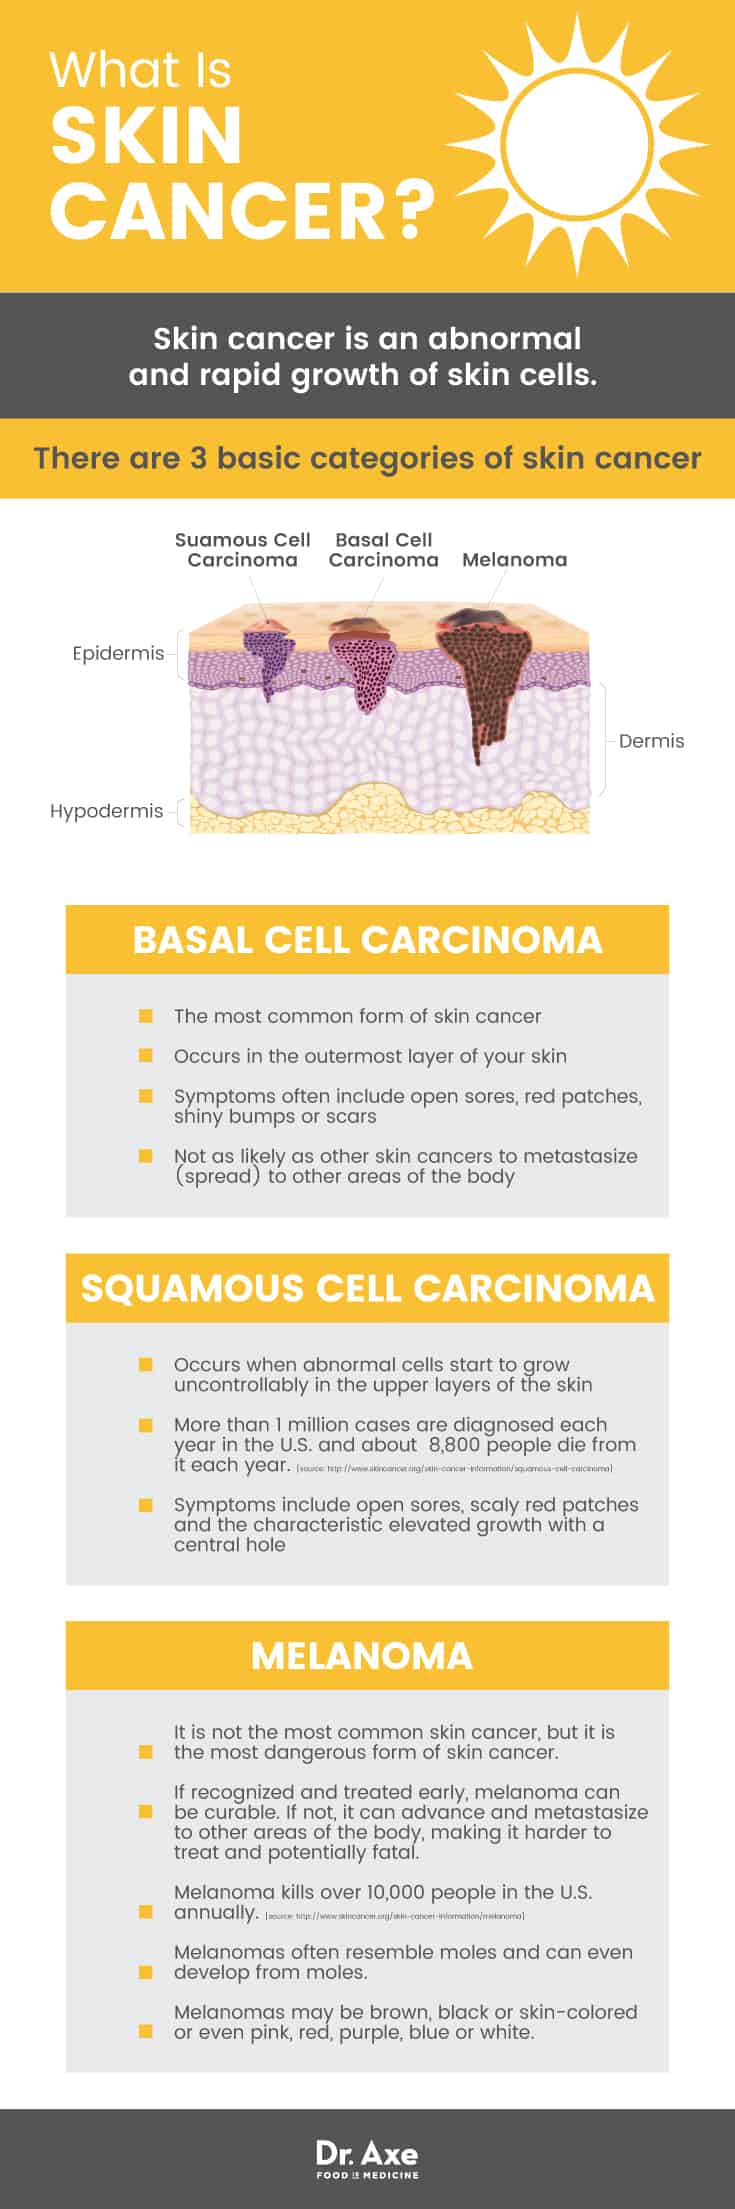 Skin cancer symptoms: what is skin cancer? - Dr. Axe